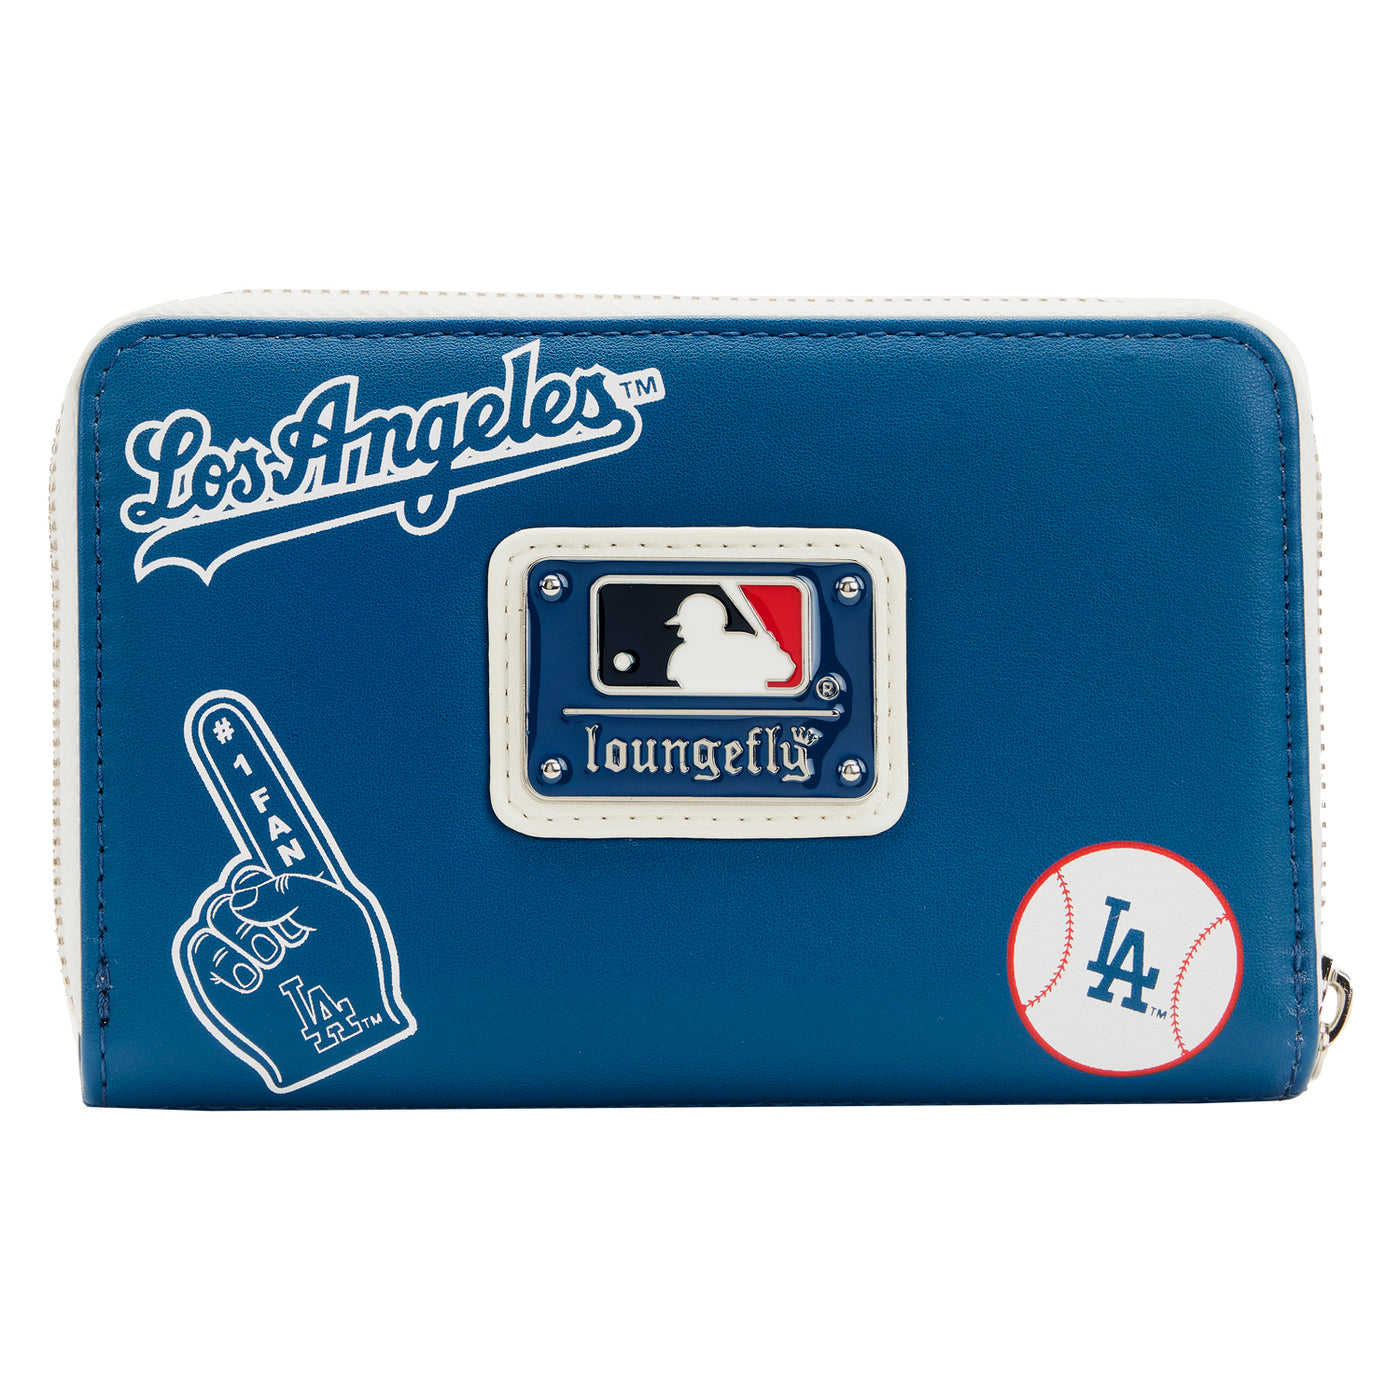 MLB Los Angeles Dodgers Patches Wallet